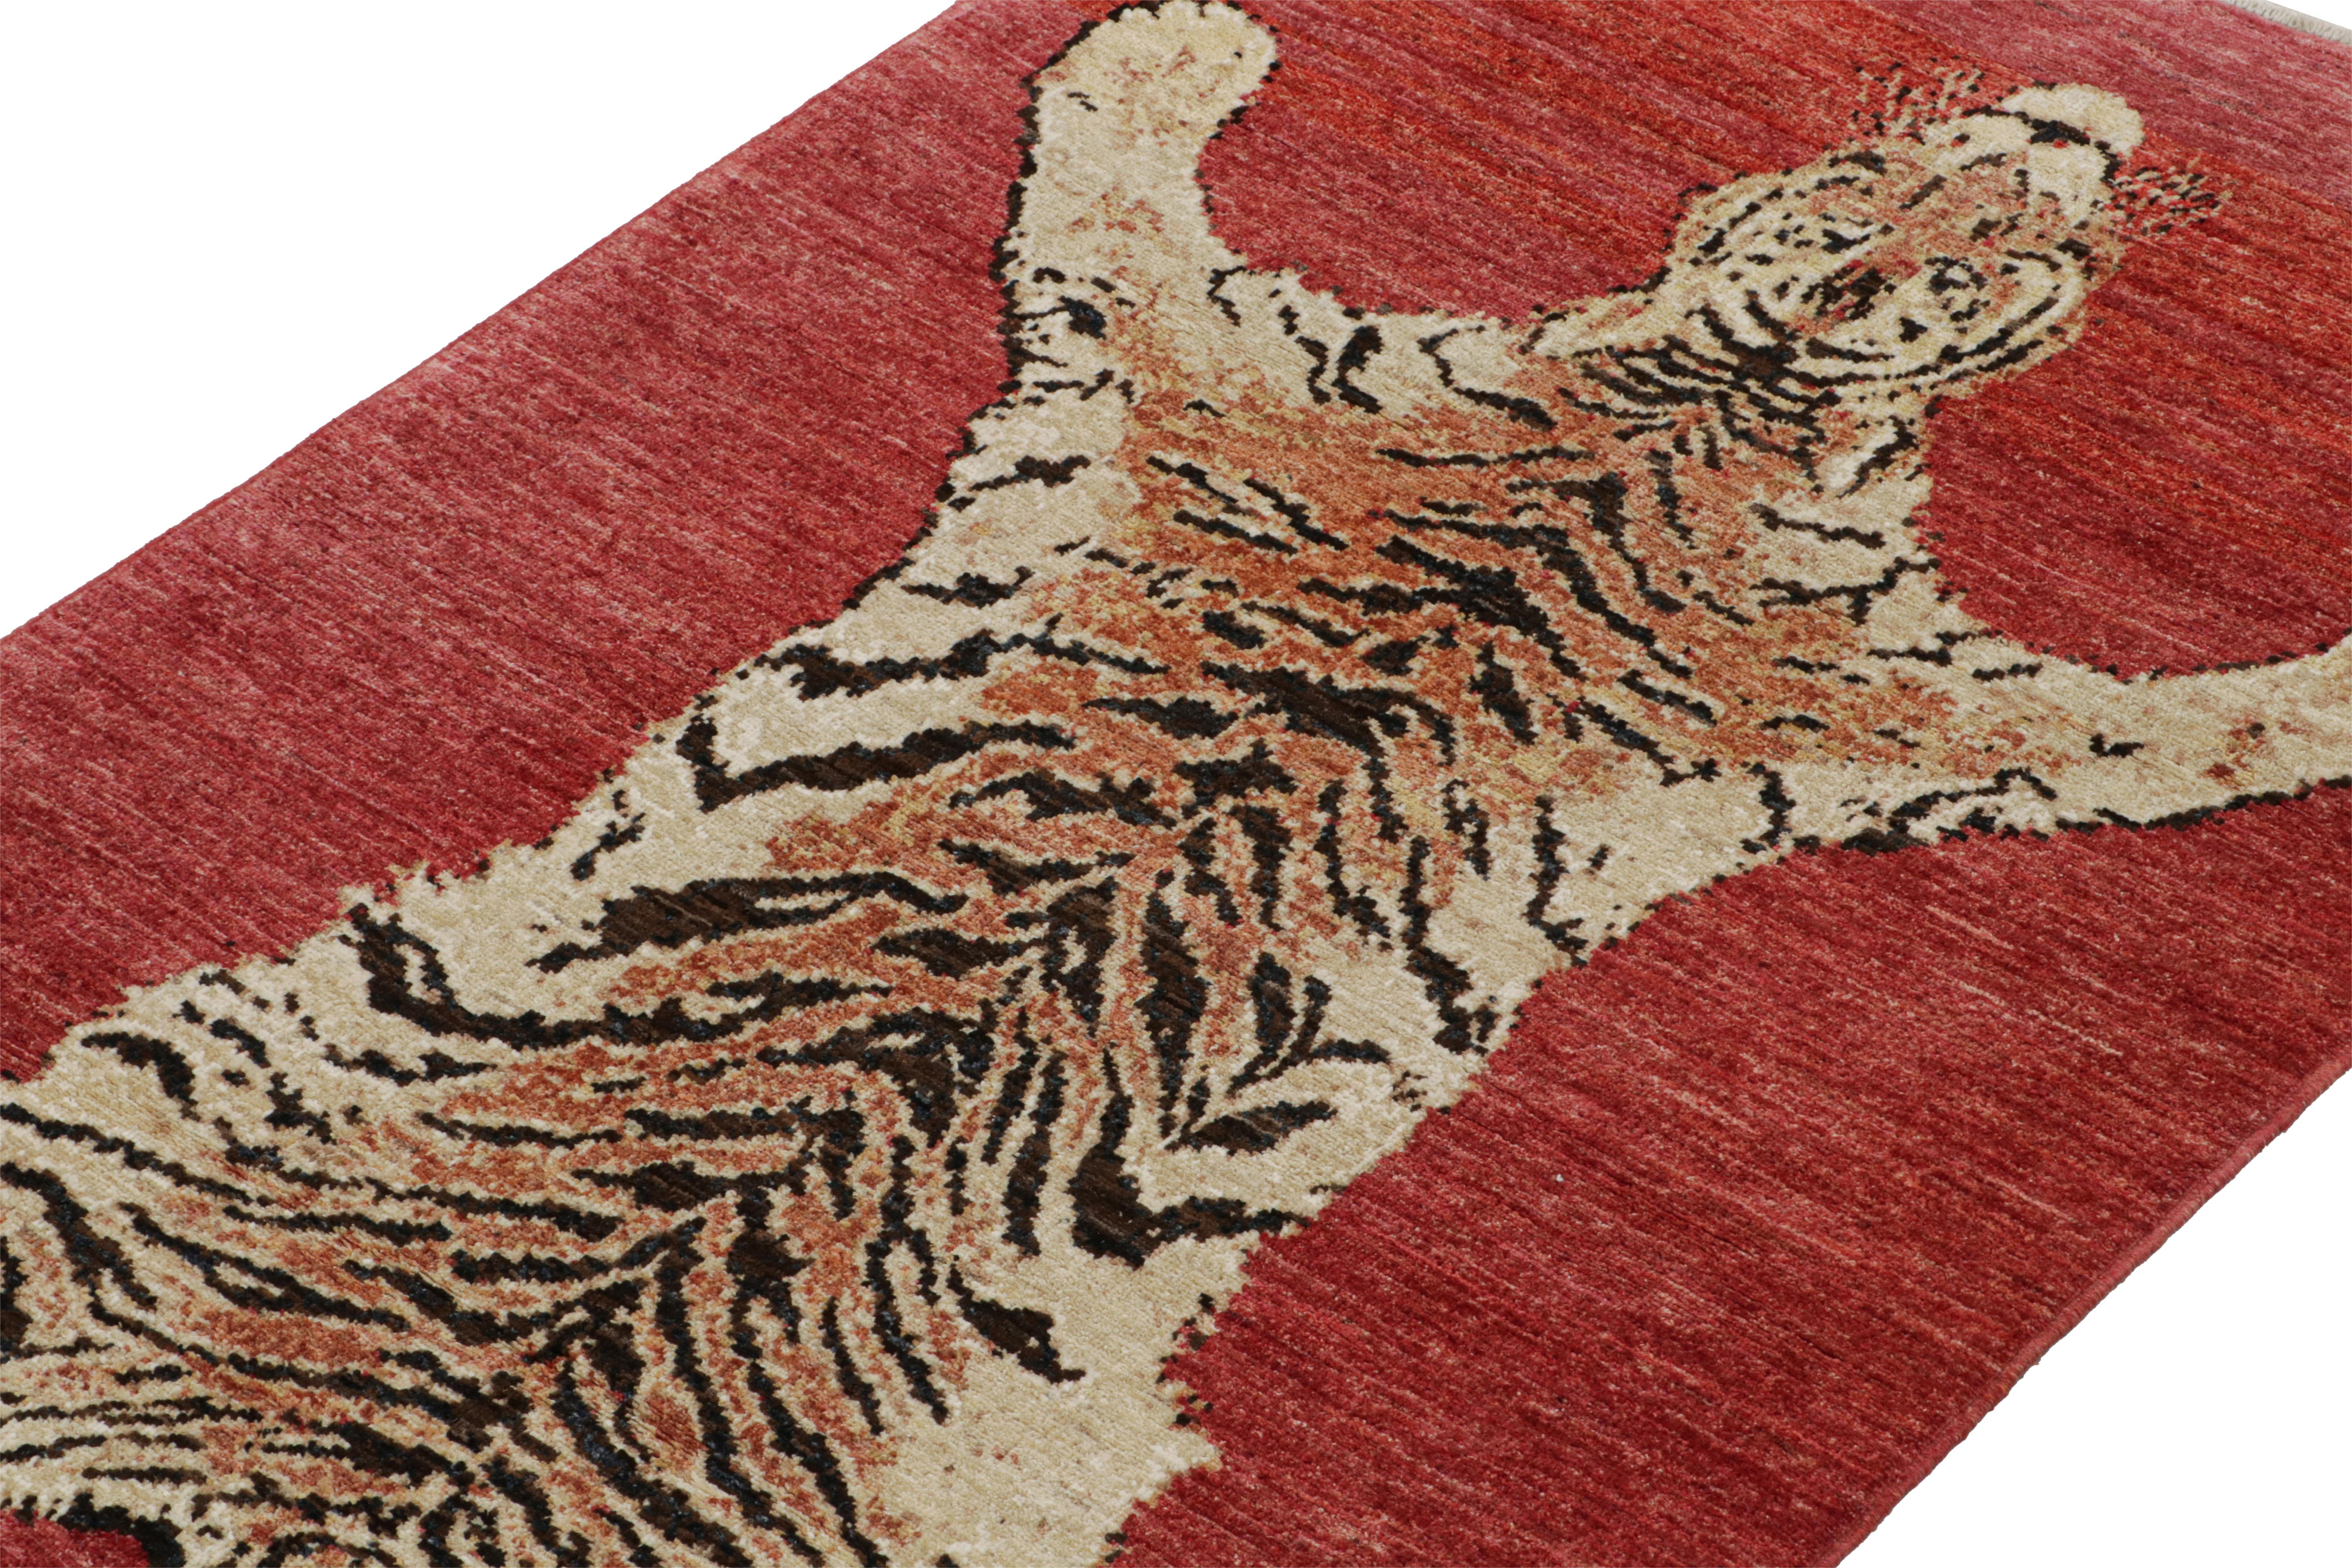 This contemporary 4x7 tiger rug is a bold new addition to Rug & Kilim’s Tigers Collection. Our collection spans several cultures and recaptures iconic pictorial styles in folk art and handmade antique Oriental rugs alike. 

Further on the